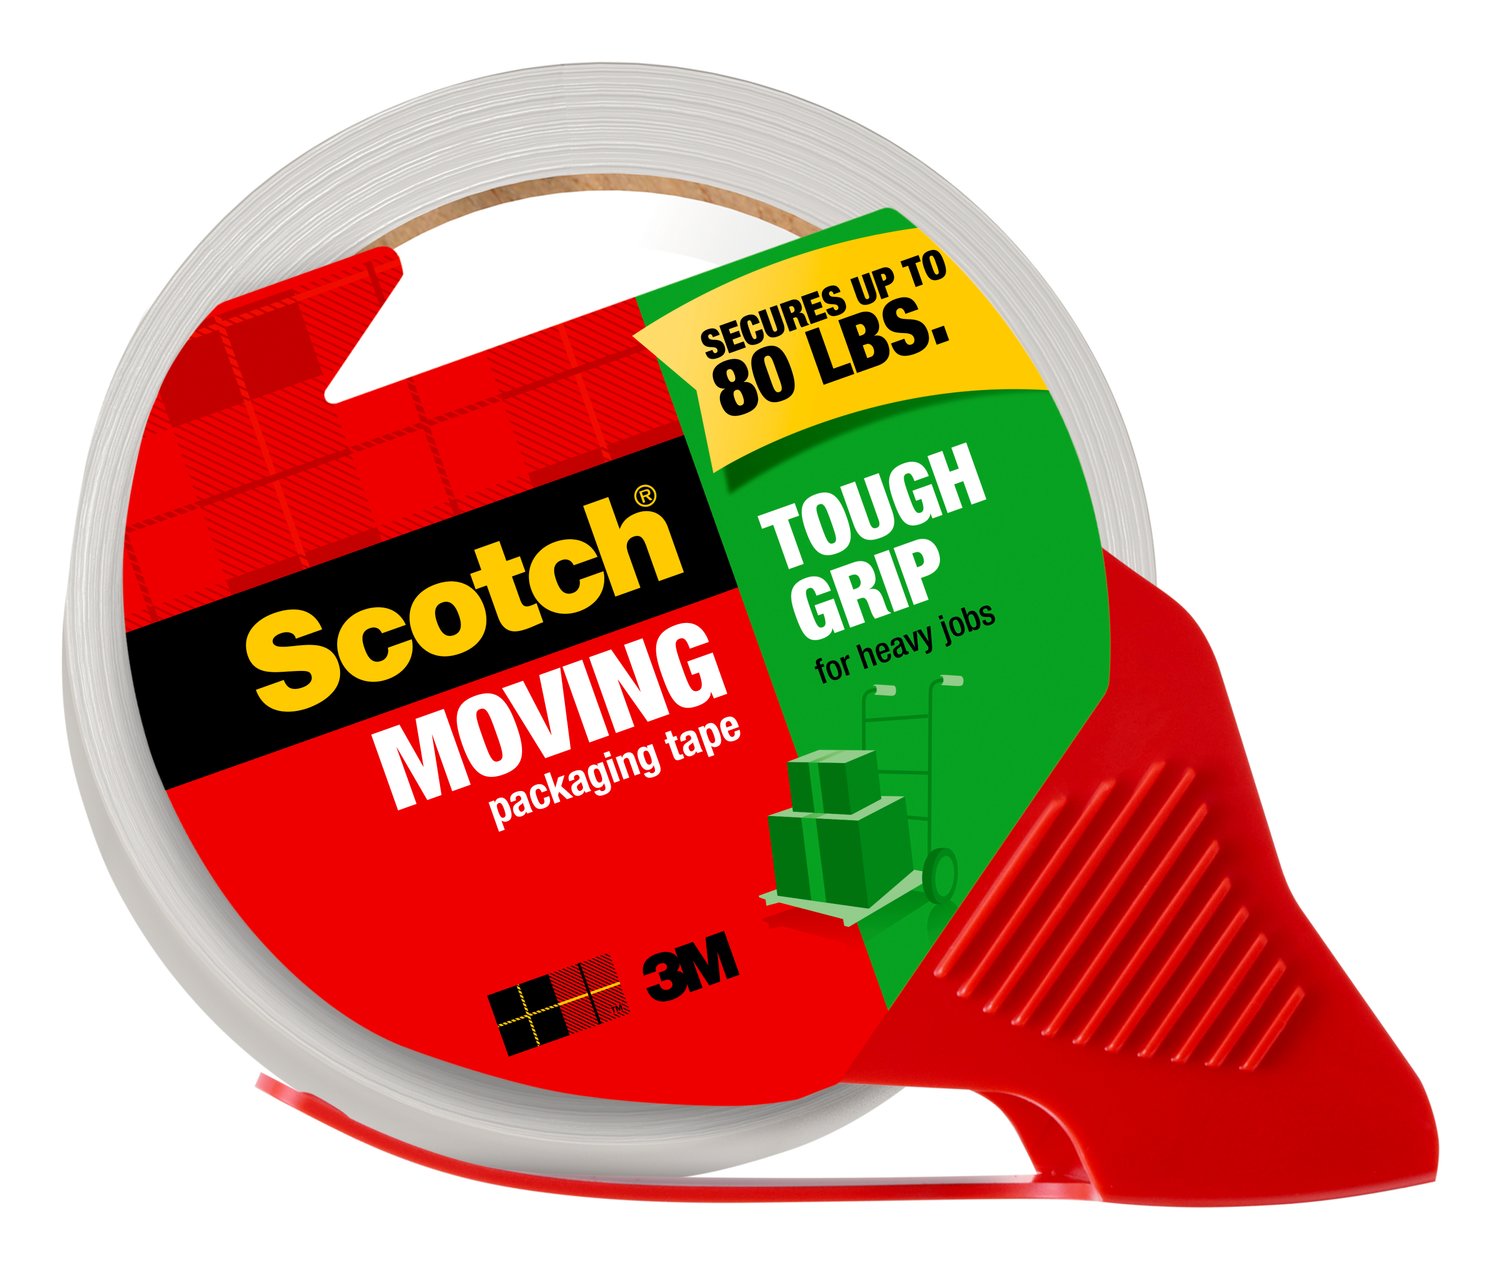 7100247520 - Scotch Moving Tough Grip Packaging Tape 3500S-RD-36GC, 1.88 in x 38.2
yd (48 mm x 35 m) with Dispenser